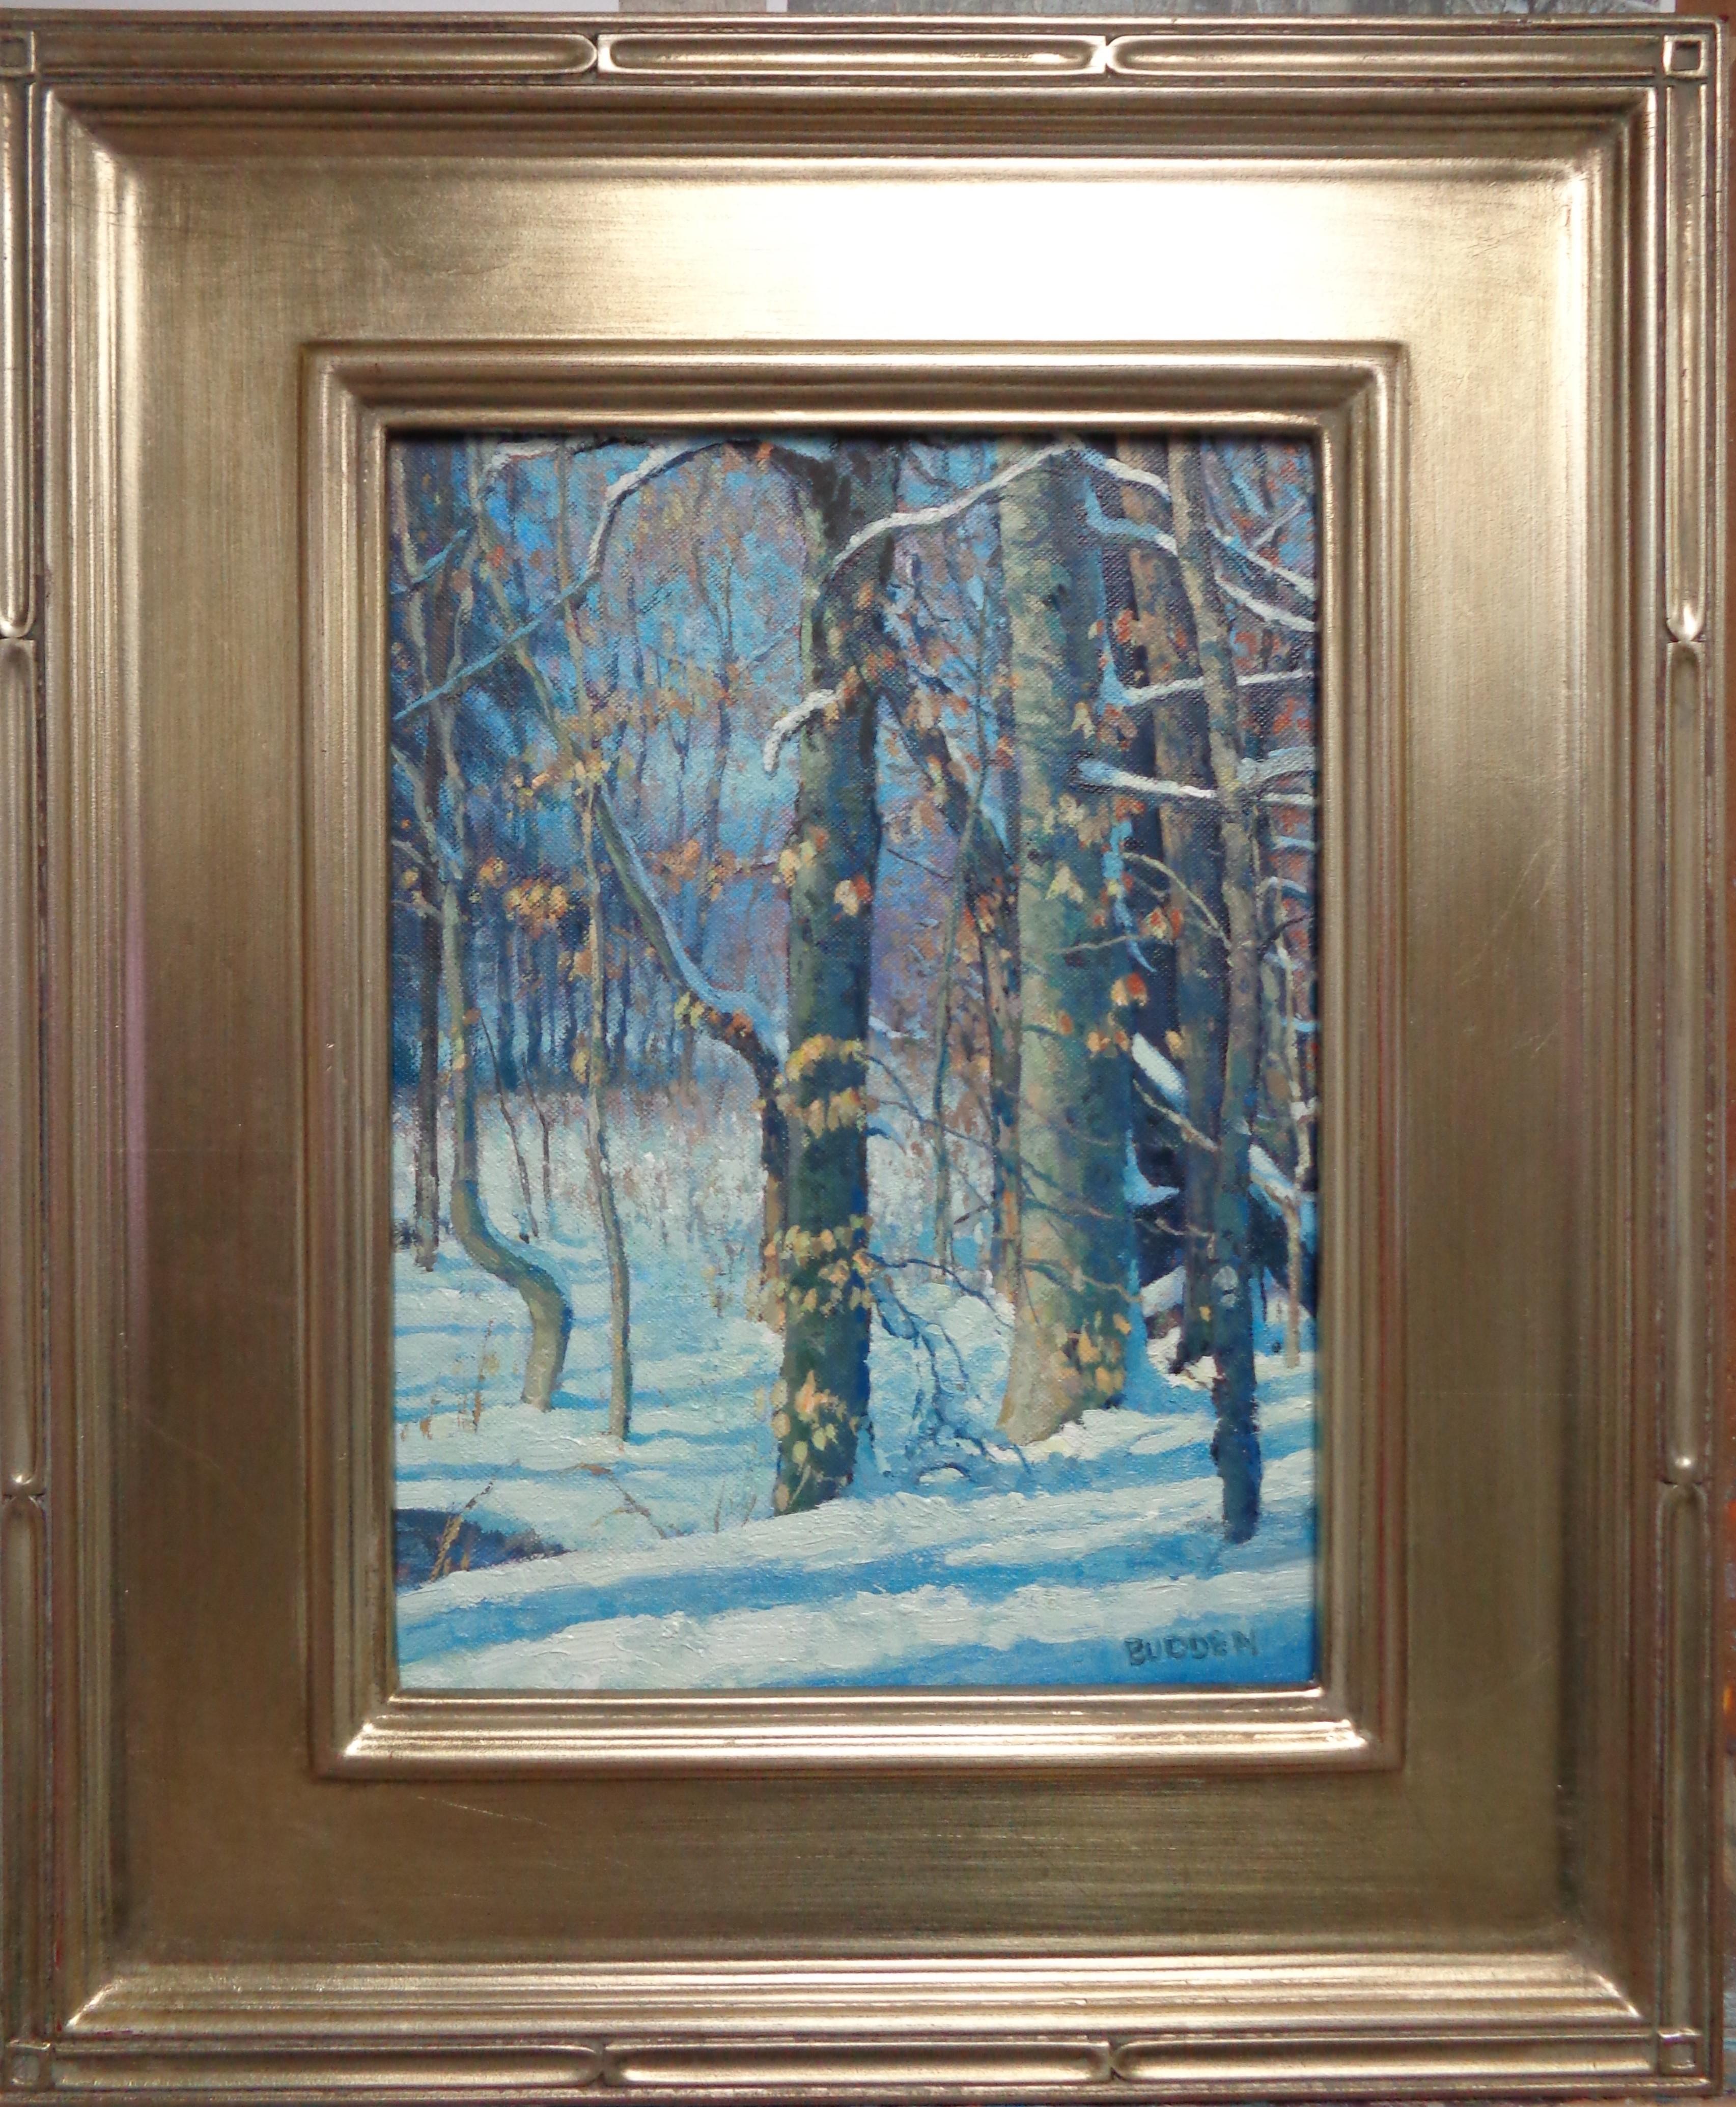 Winter Woodland Interior IV
oil/canvas panel
12 x 9 image unframed, 18.5 x 15.5 framed.
A beautiful little winter study of light and shadow falling across this scene of trees and snow. 

SELLERS STATEMENT
I have been in the art business as an artist